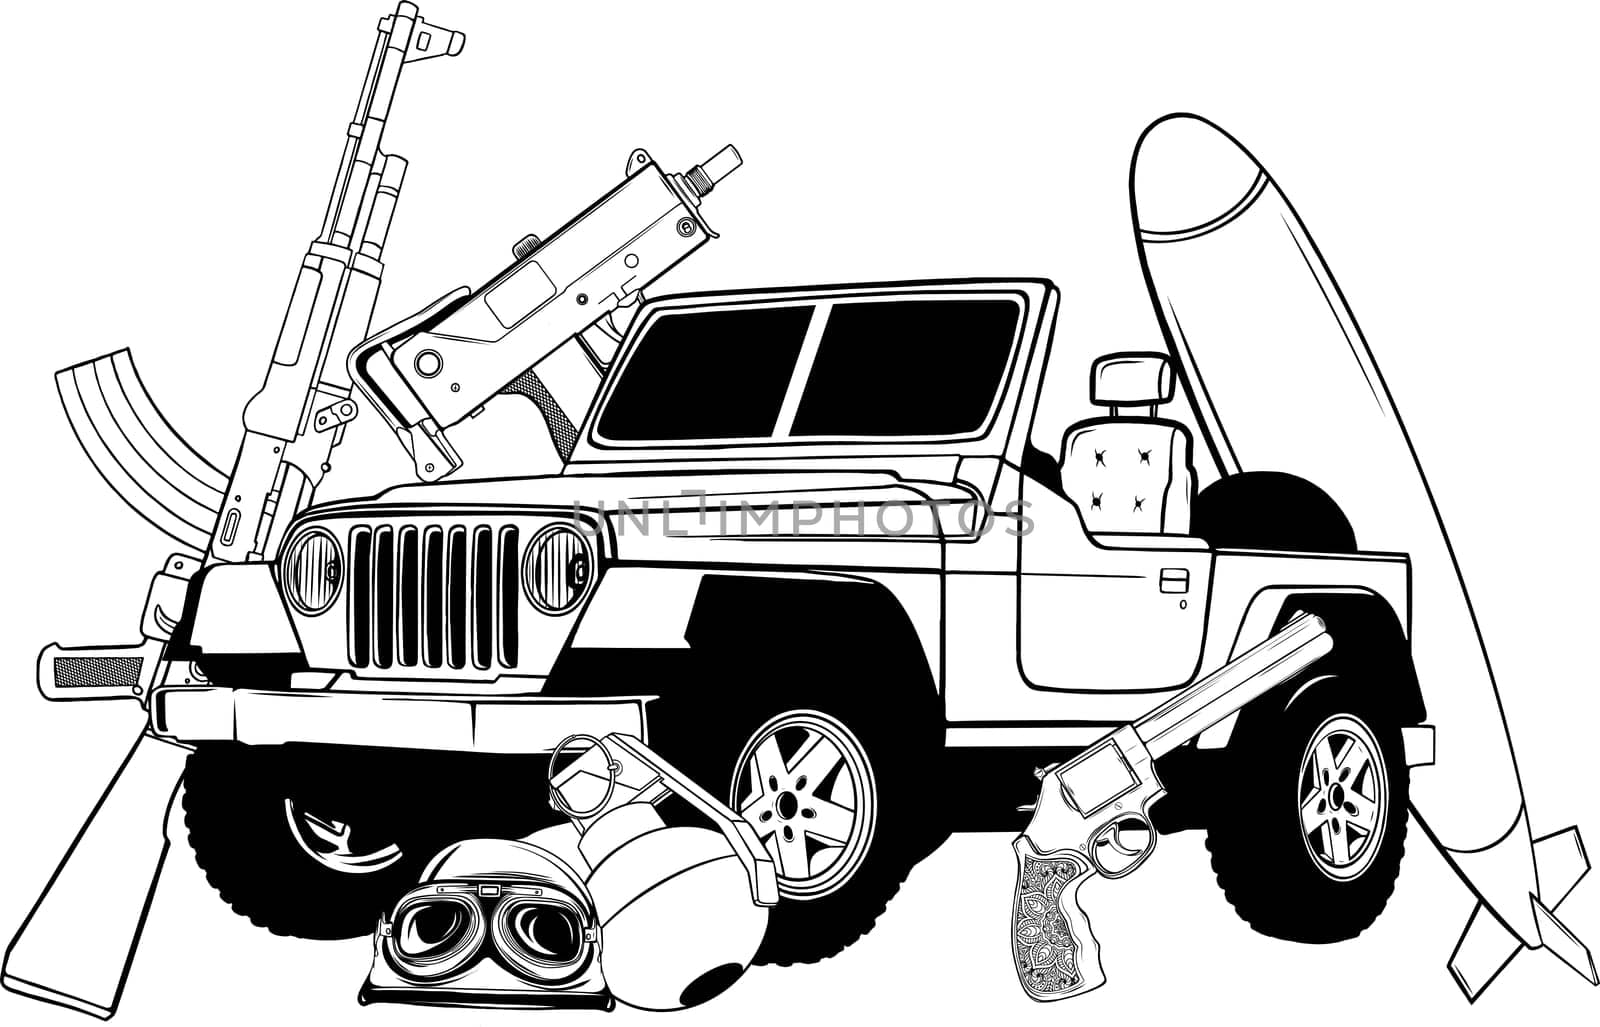 illustration of Monochrome jeep army by dean